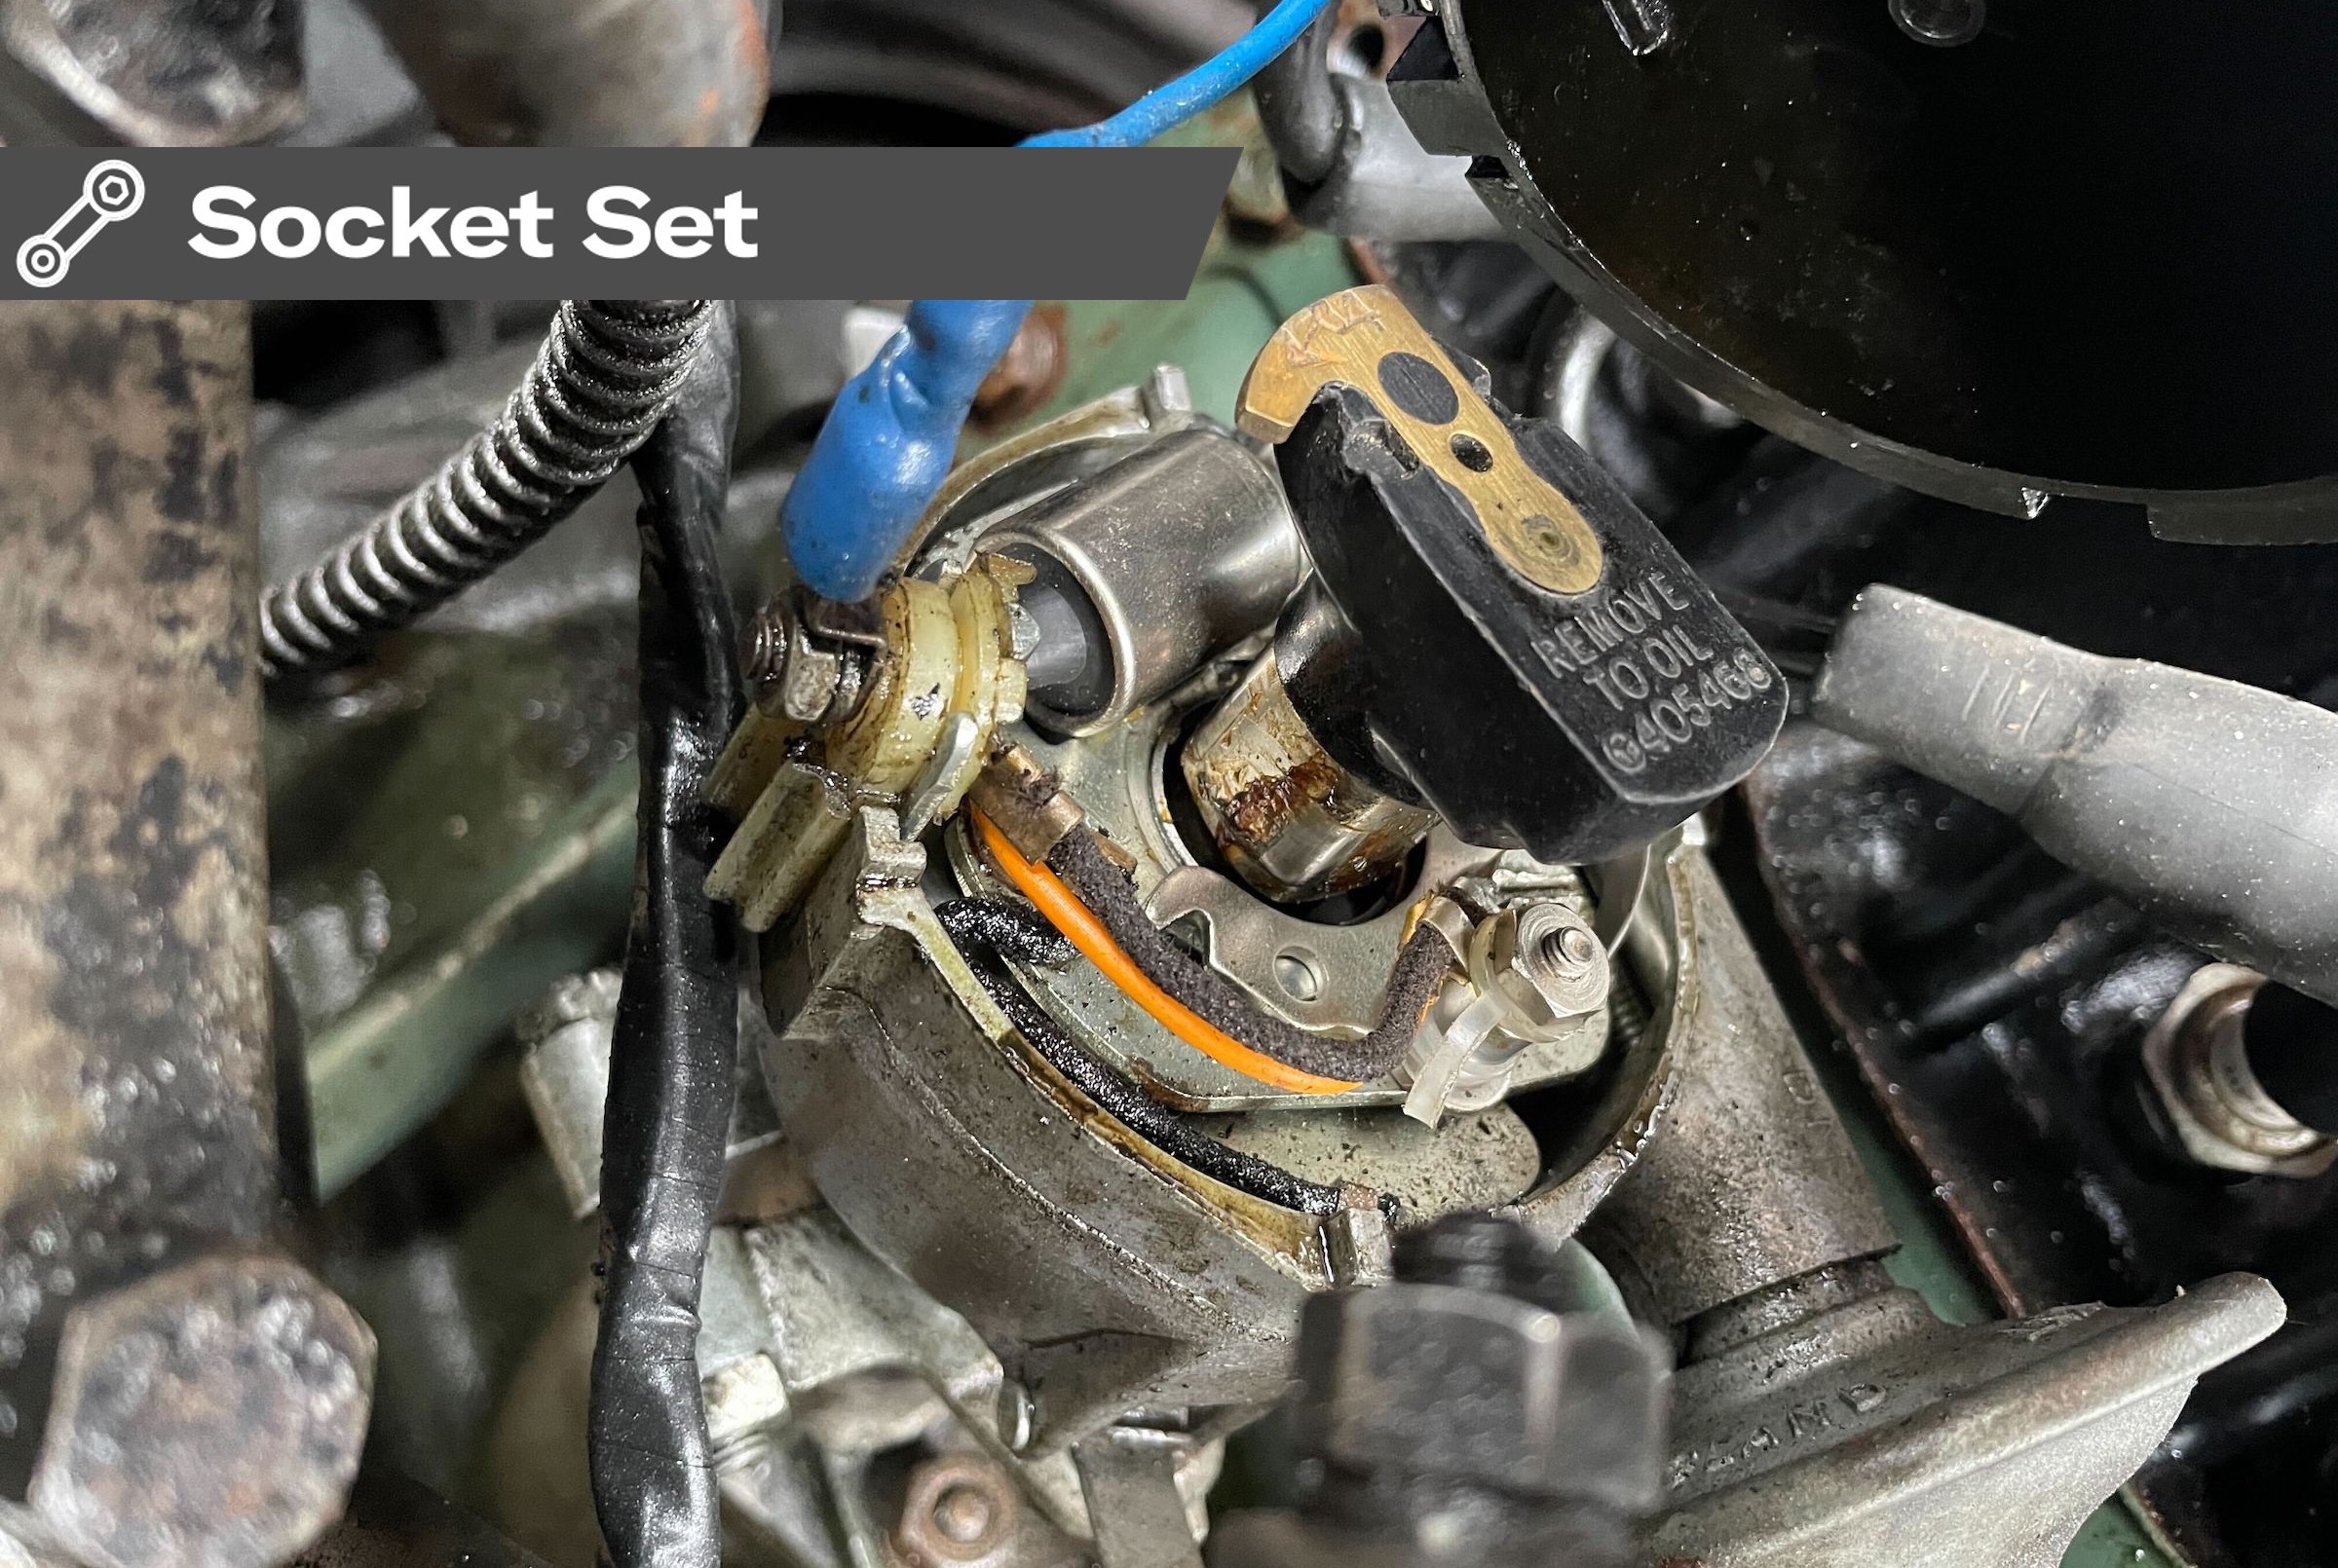 Socket Set: When did you last check your ignition system?